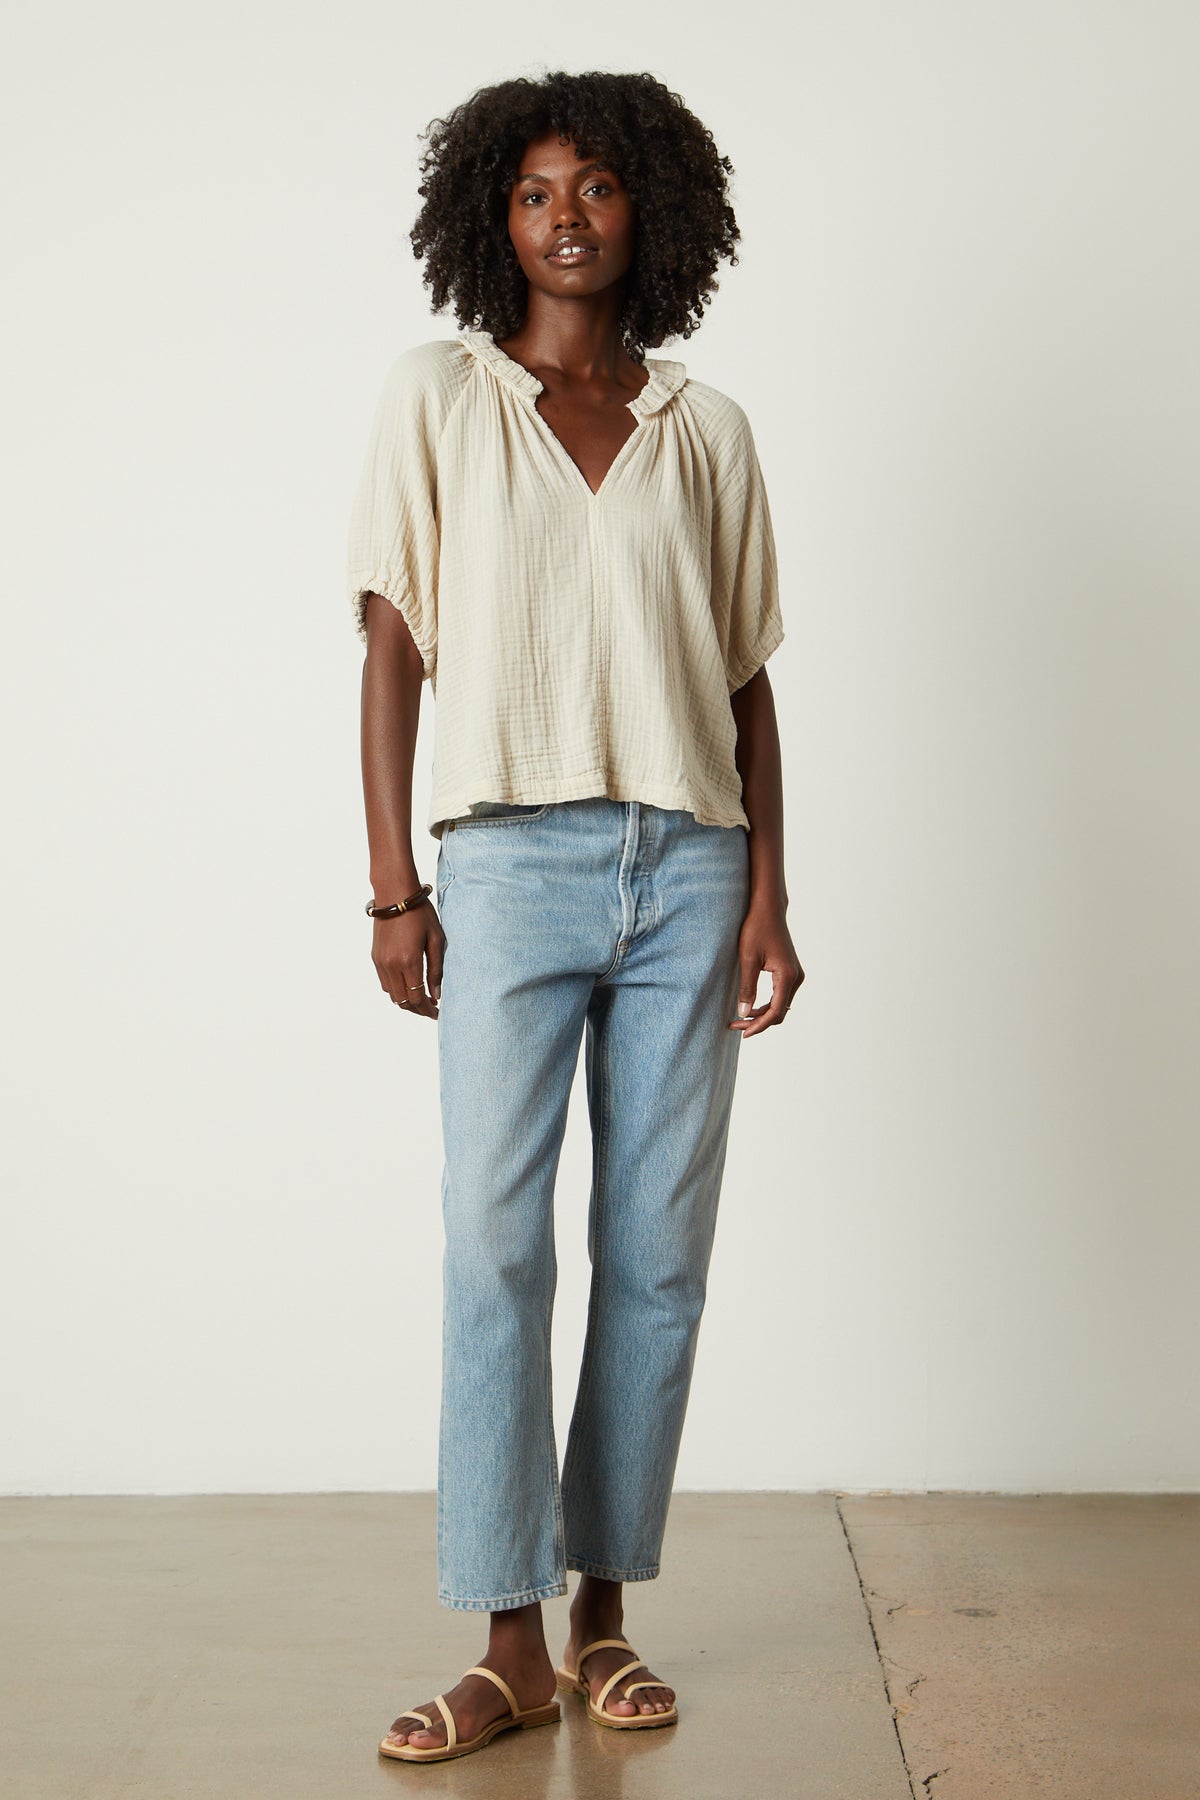   The model is wearing a Velvet by Graham & Spencer Ilene Puff Sleeve Top and jeans with a relaxed fit. 